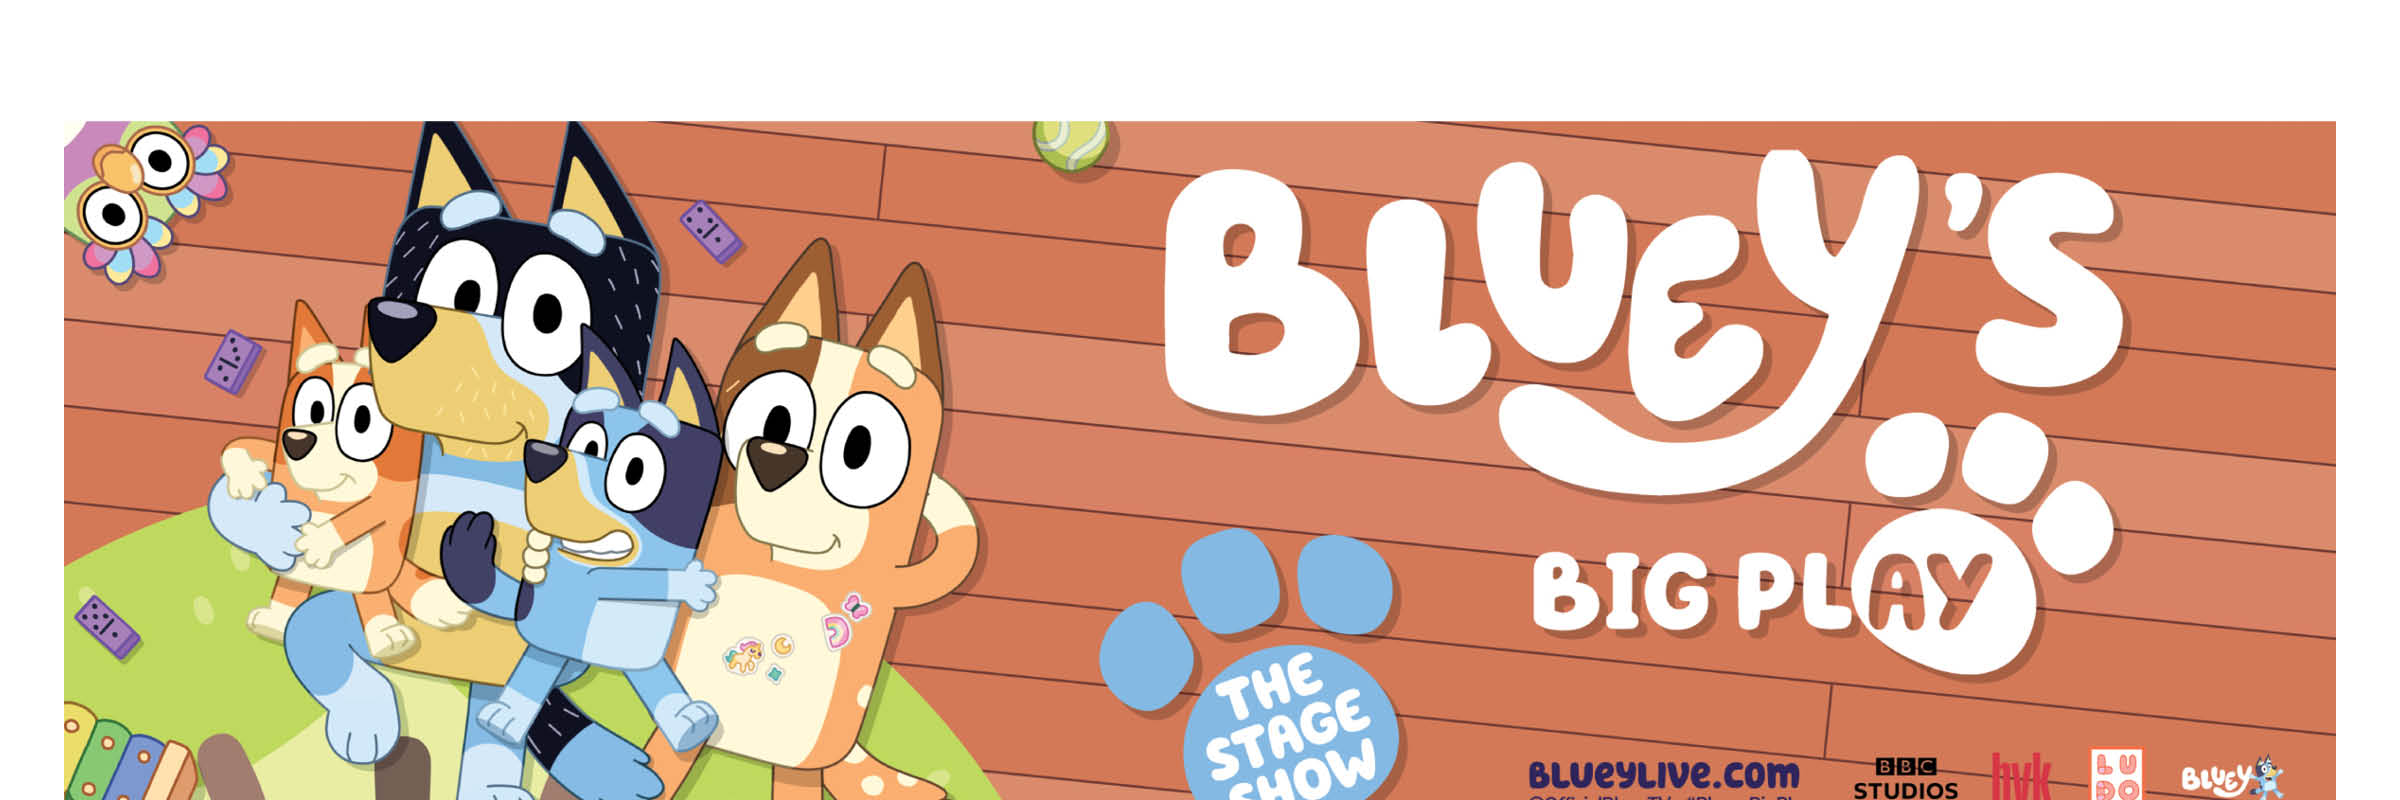 Bank of America Performing Arts Center Thousand Oaks | Bluey's Big Play